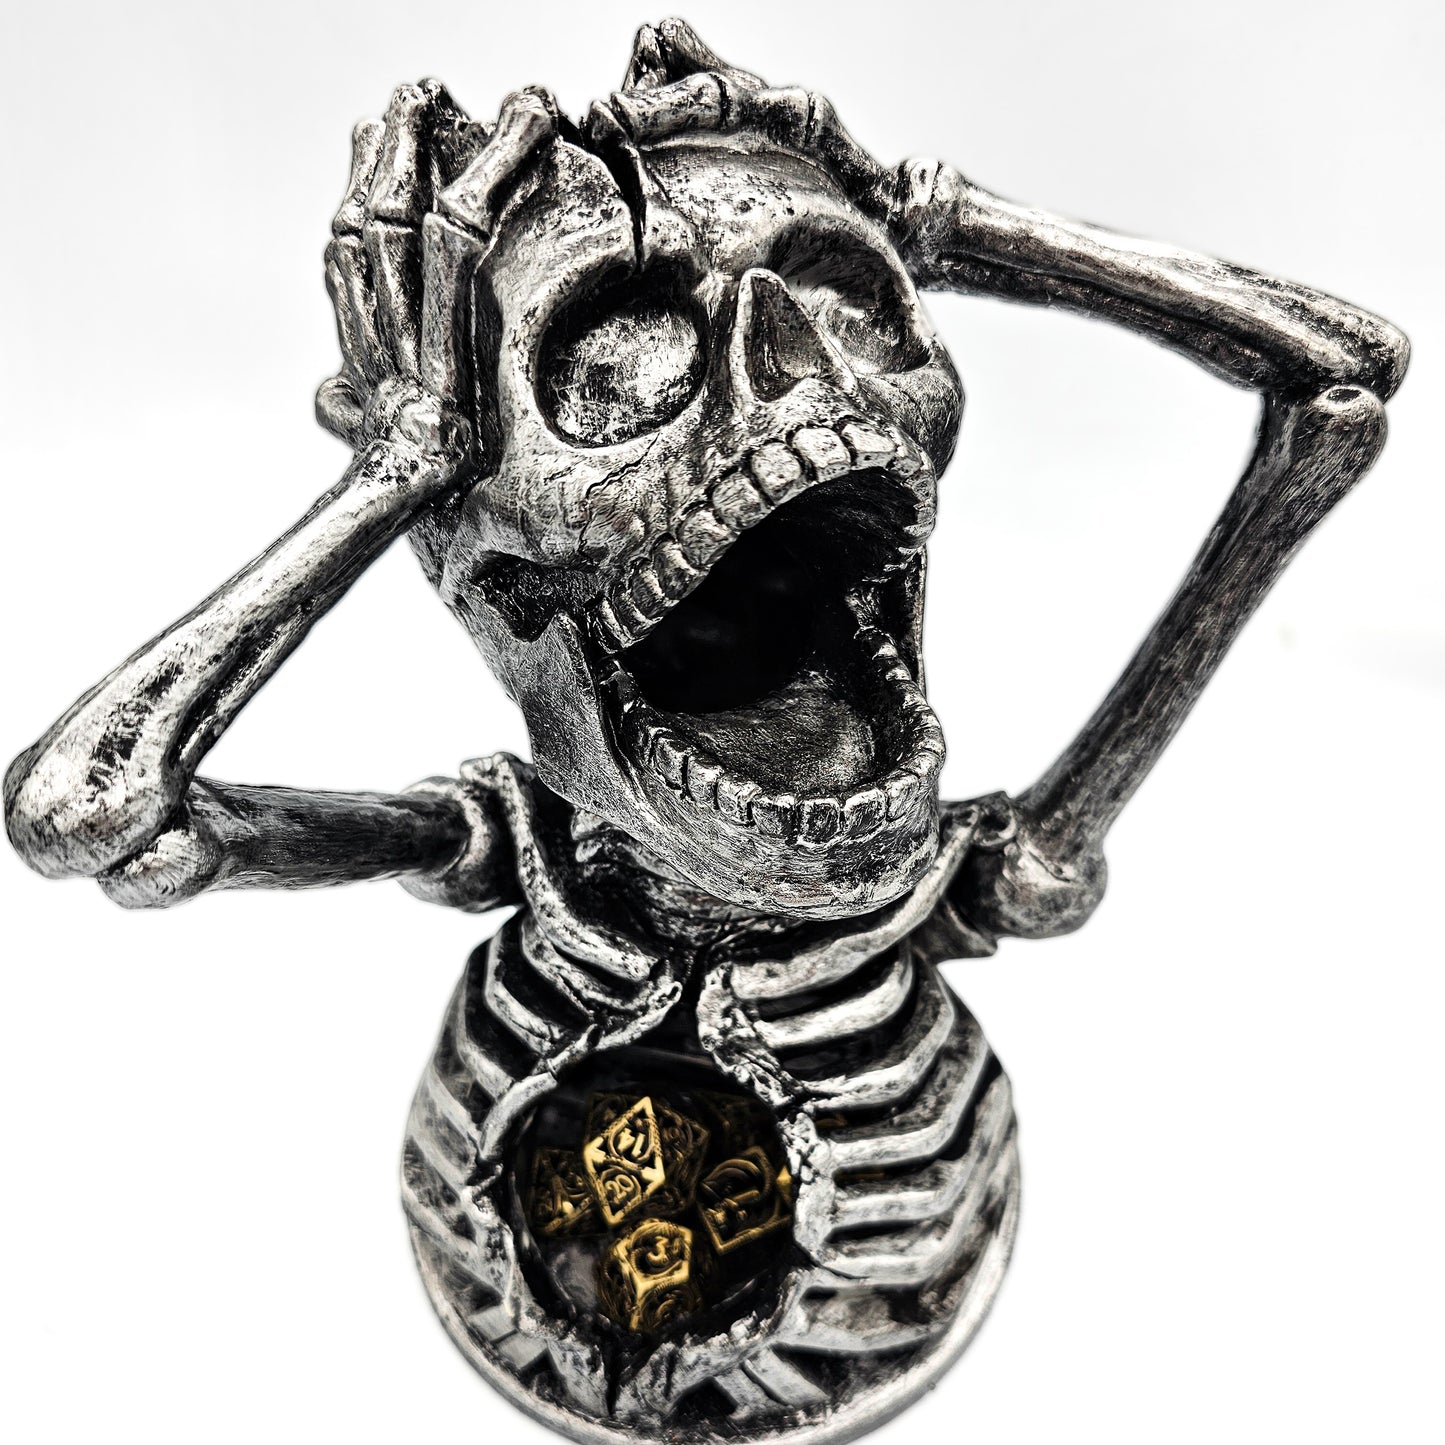 9" Ancient Silver Skeleton DND Dice Tower